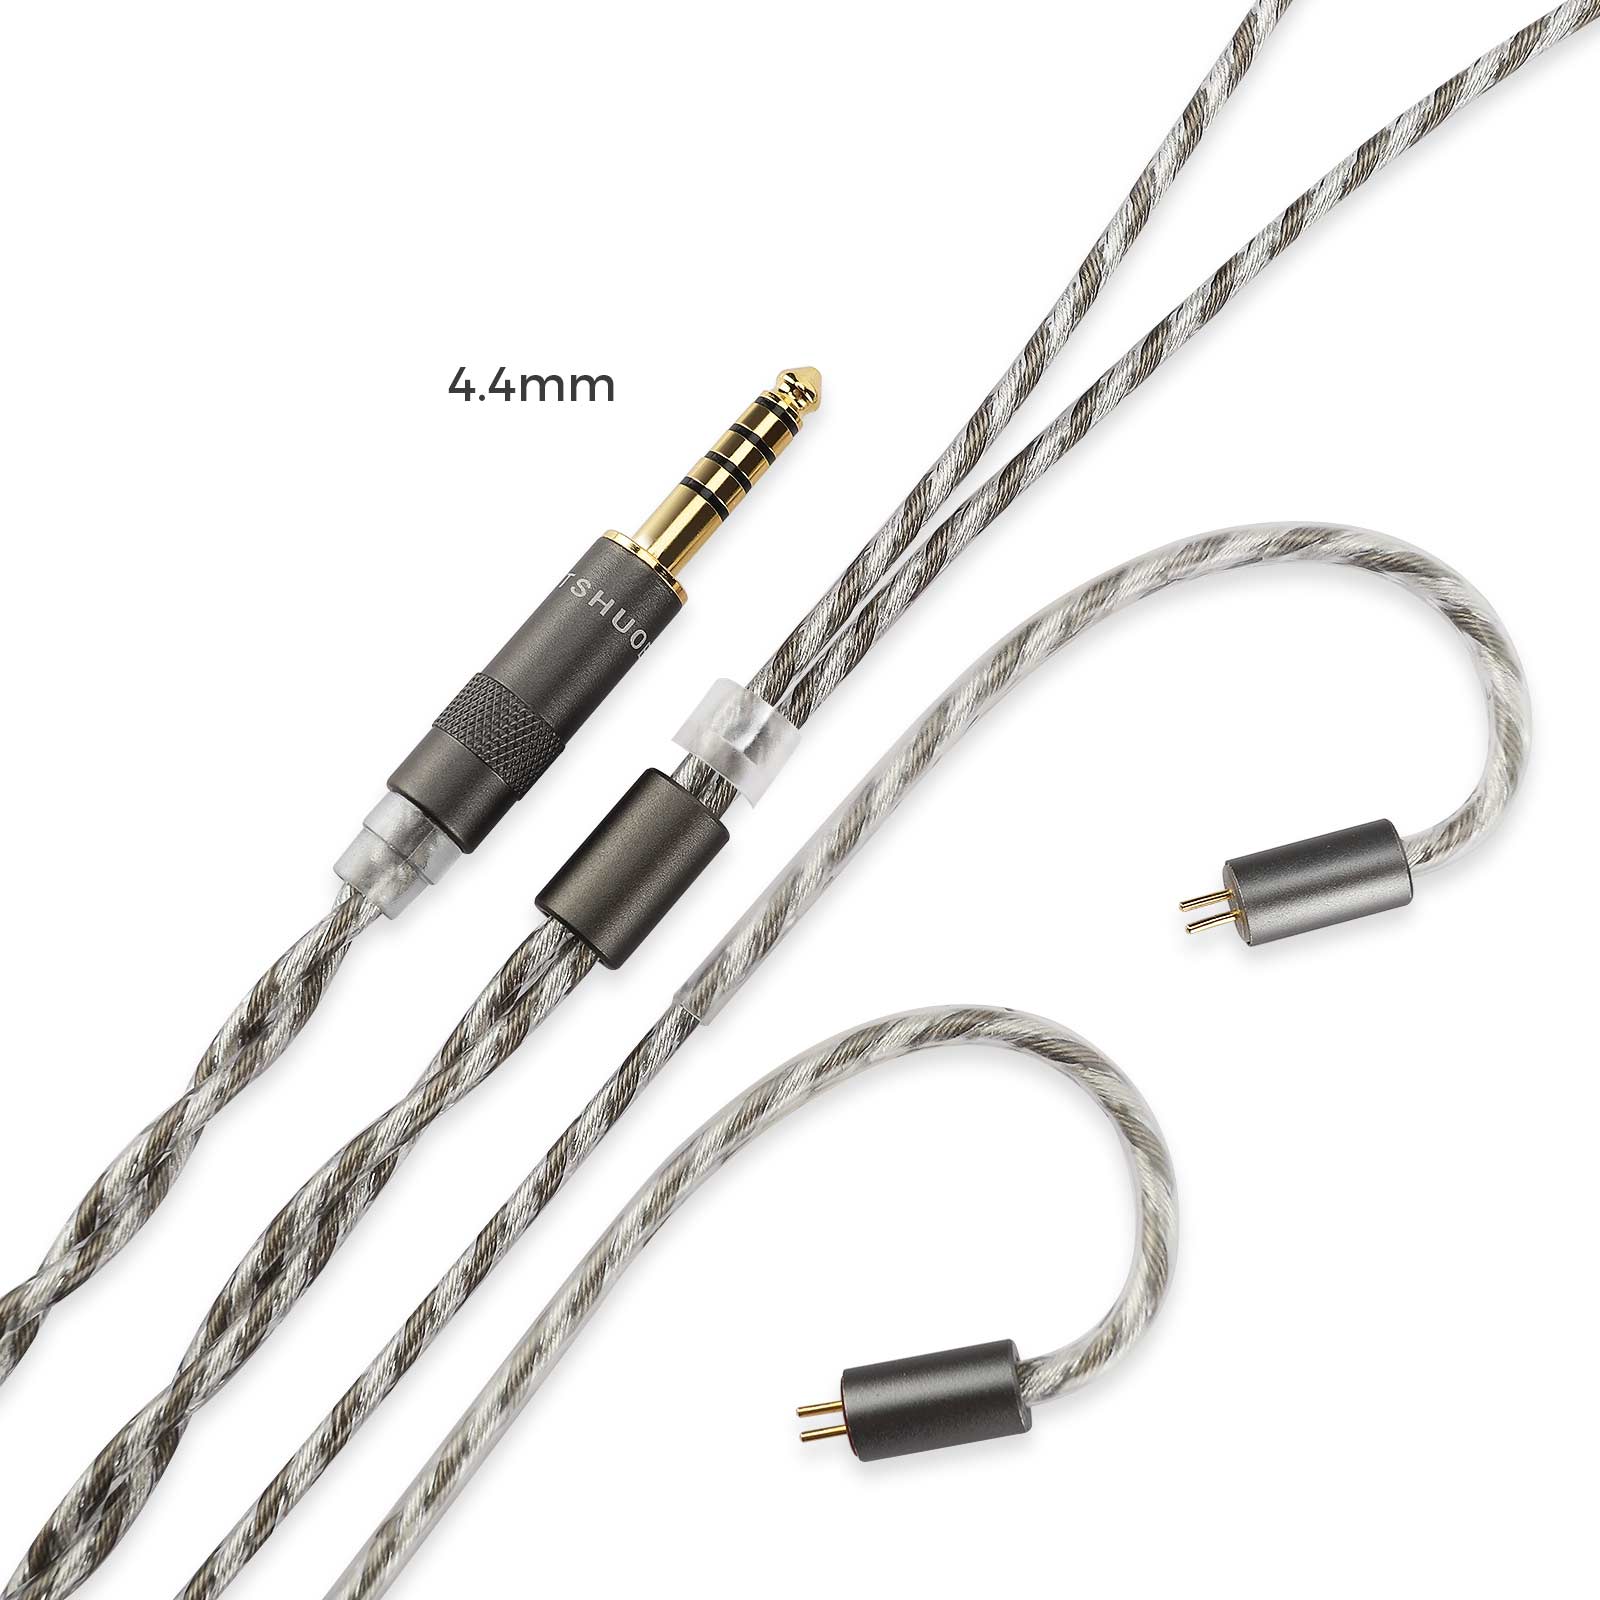 LETSHUOER M5-Standard S12 audio 3.5mm cable or 4.4mm balanced headphone cables with 2 pin connector 392 strands silver-plated monocrystalline copper cable